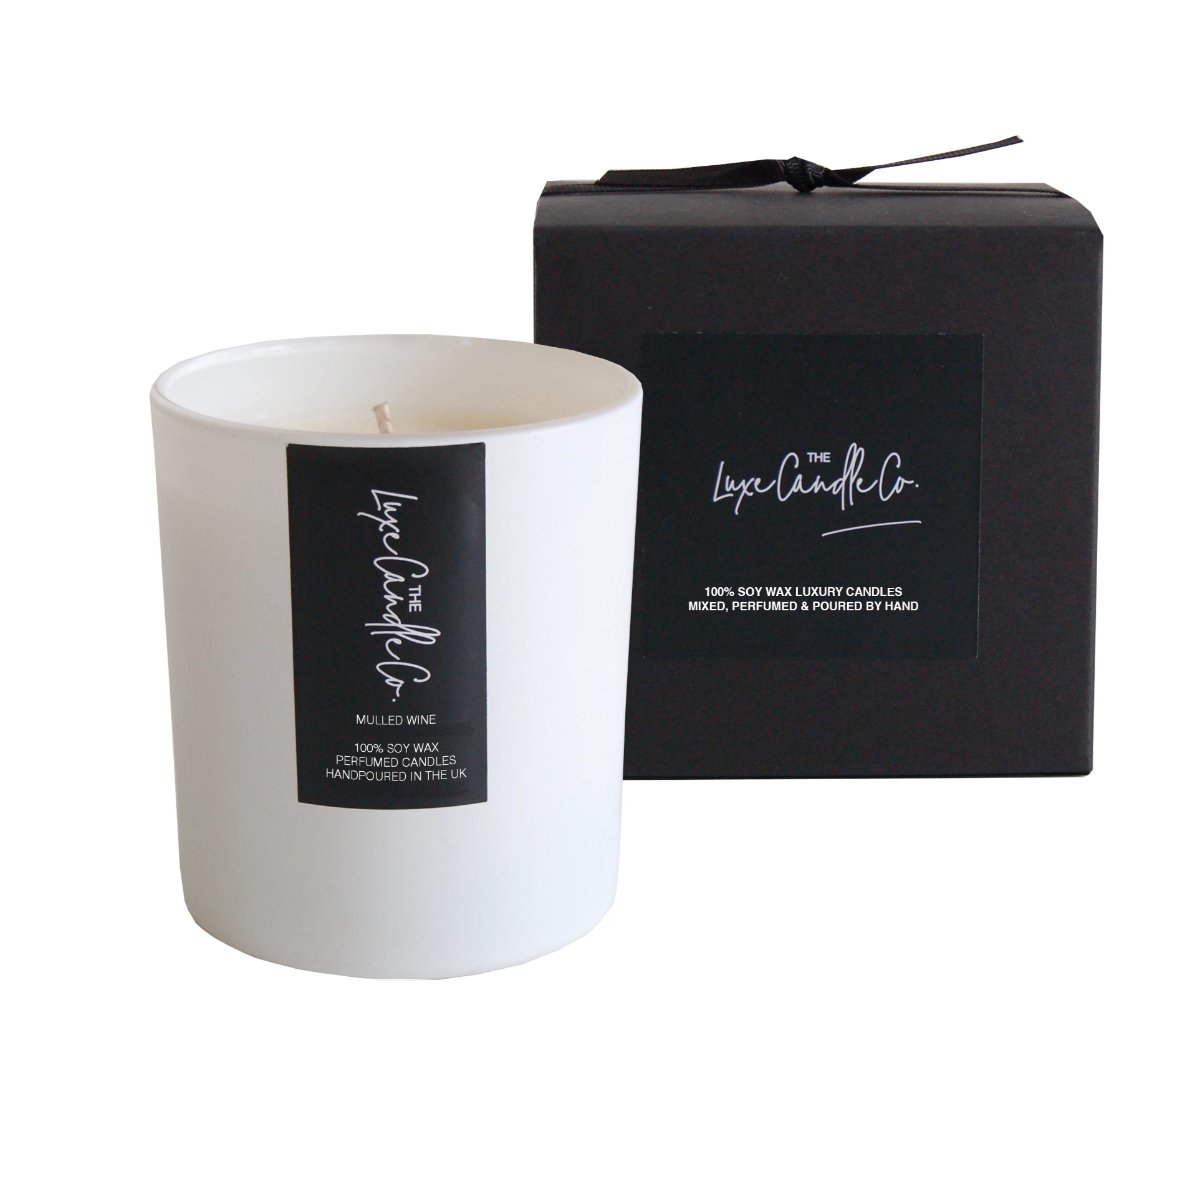 White Mulled wine scented soy wax candle